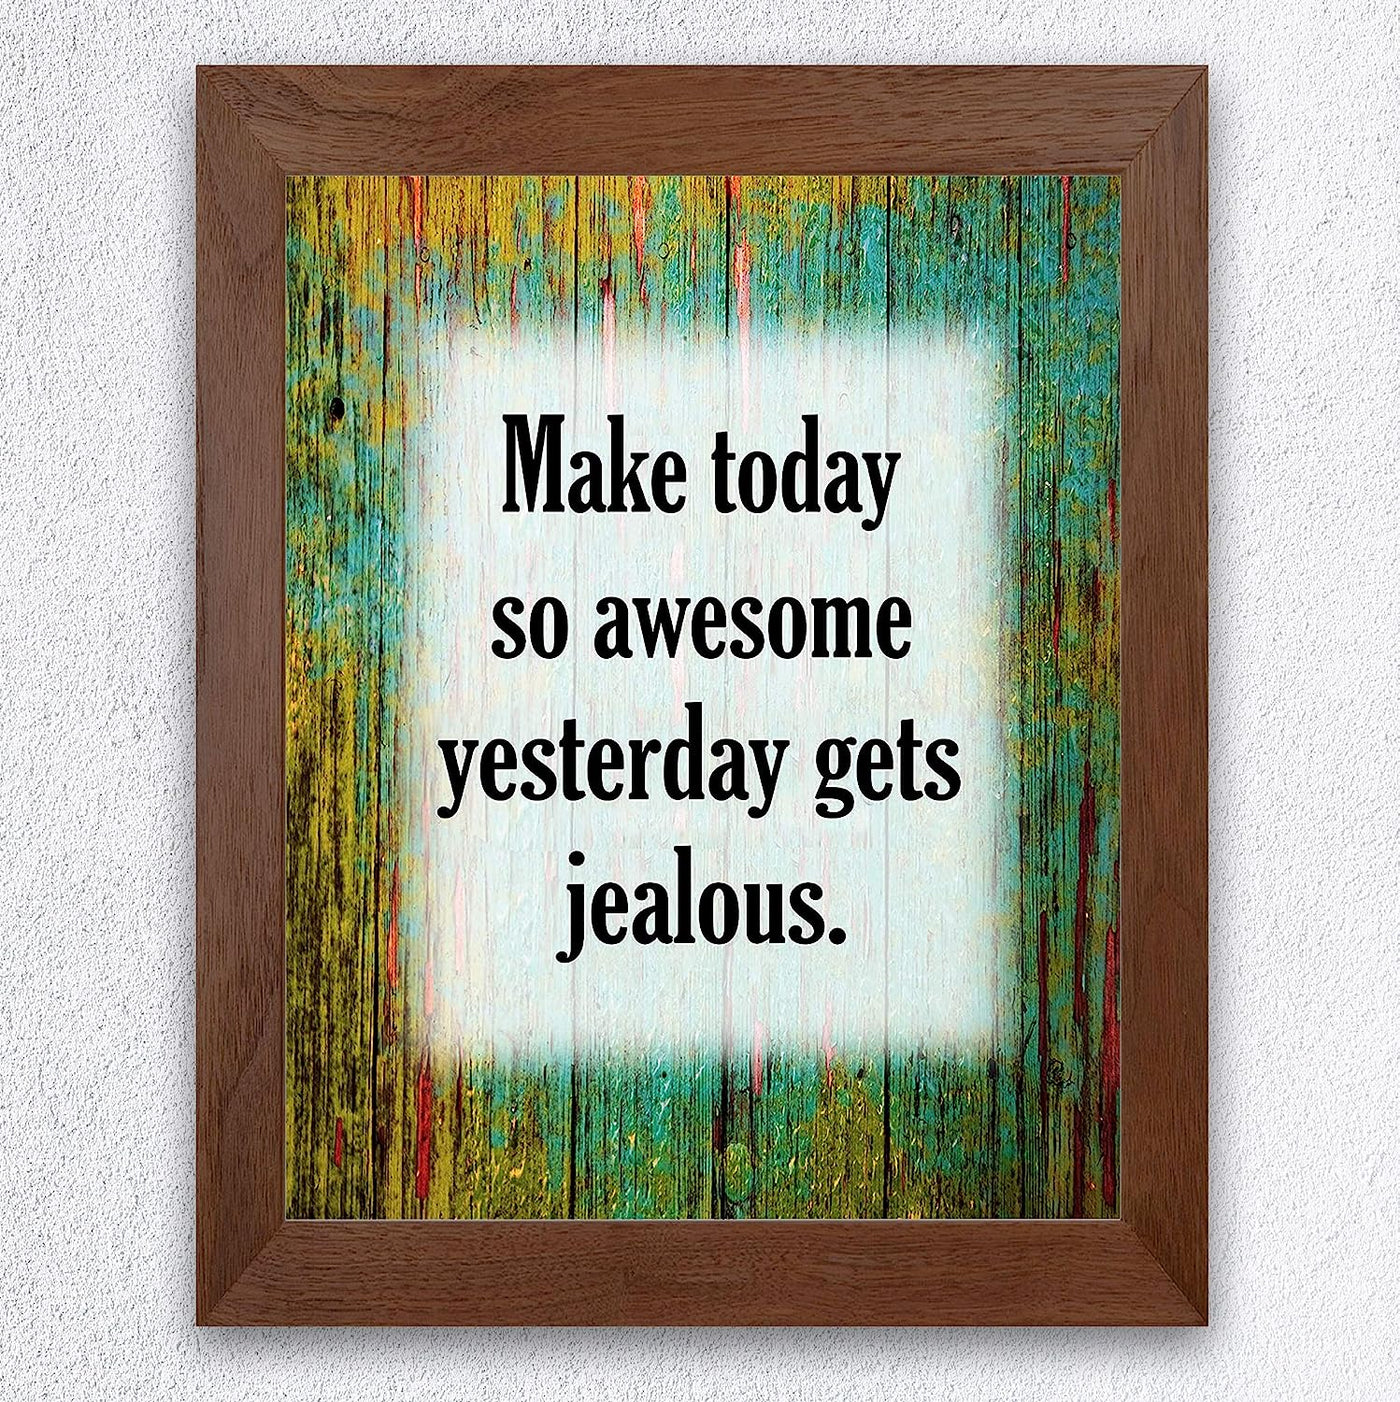 Make Today So Awesome Yesterday Gets Jealous-Motivational Wall Quotes -8 x 10" Distressed Art Print-Ready to Frame. Inspirational Decor for Home-Office-Desk-Work-School. Printed on Photo Paper.